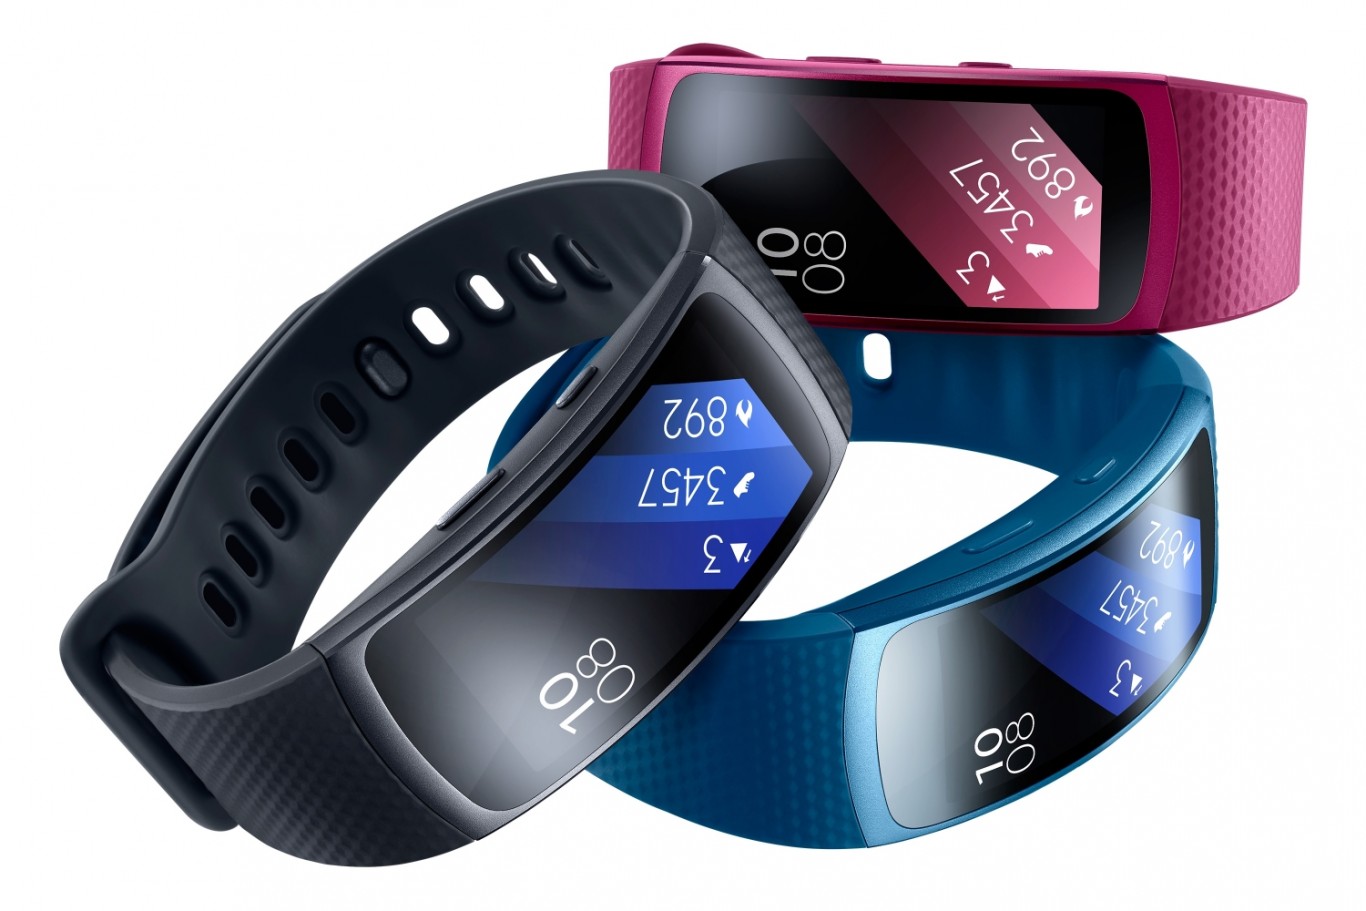 Samsung takes fitness to new levels with GPS sports band and cord-free fitness earbuds